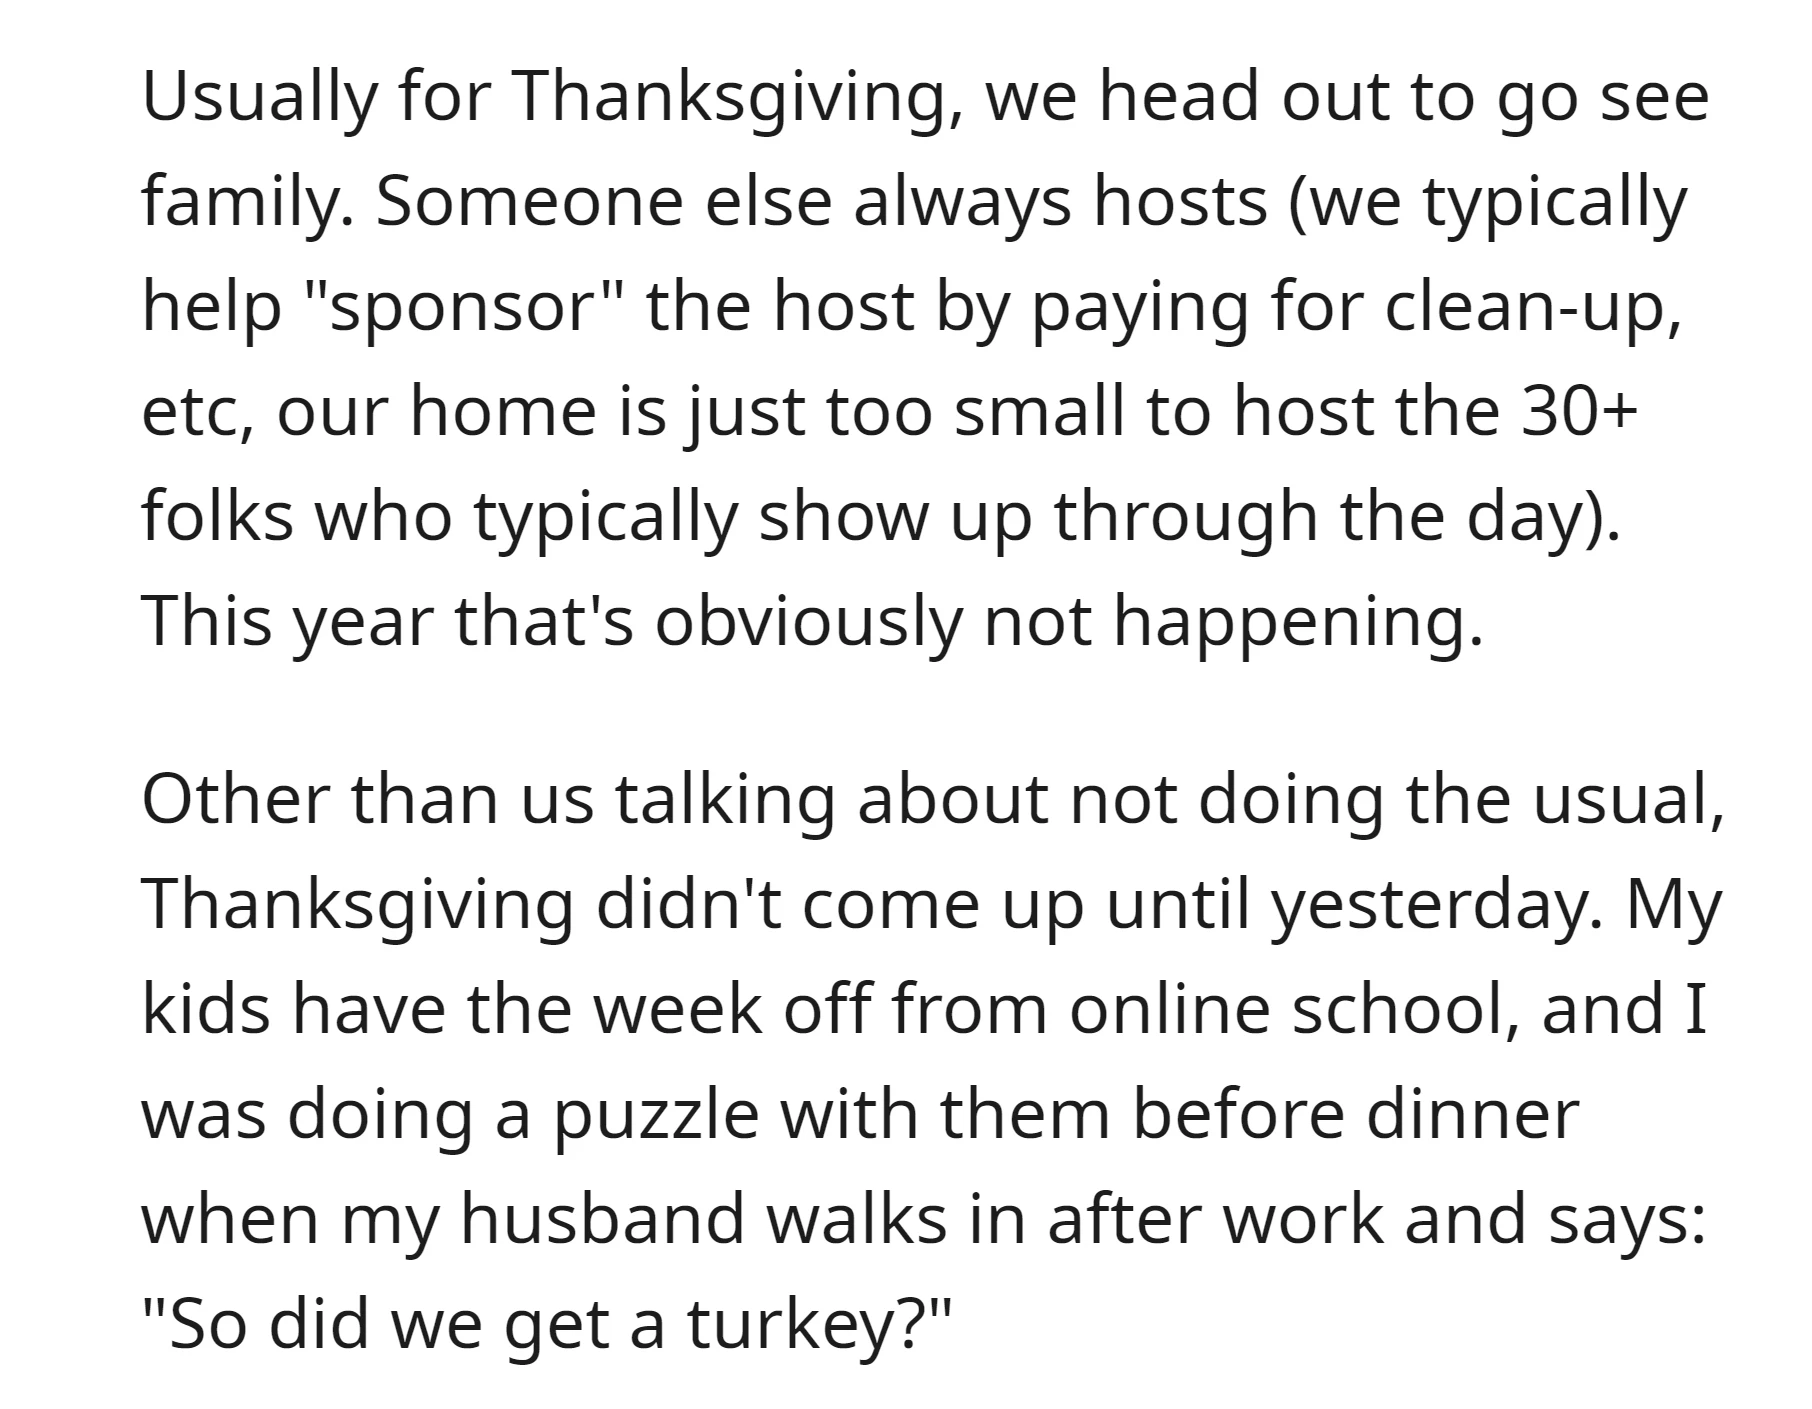 OP's family, accustomed to celebrating Thanksgiving with extended family, faced a change in plans this year